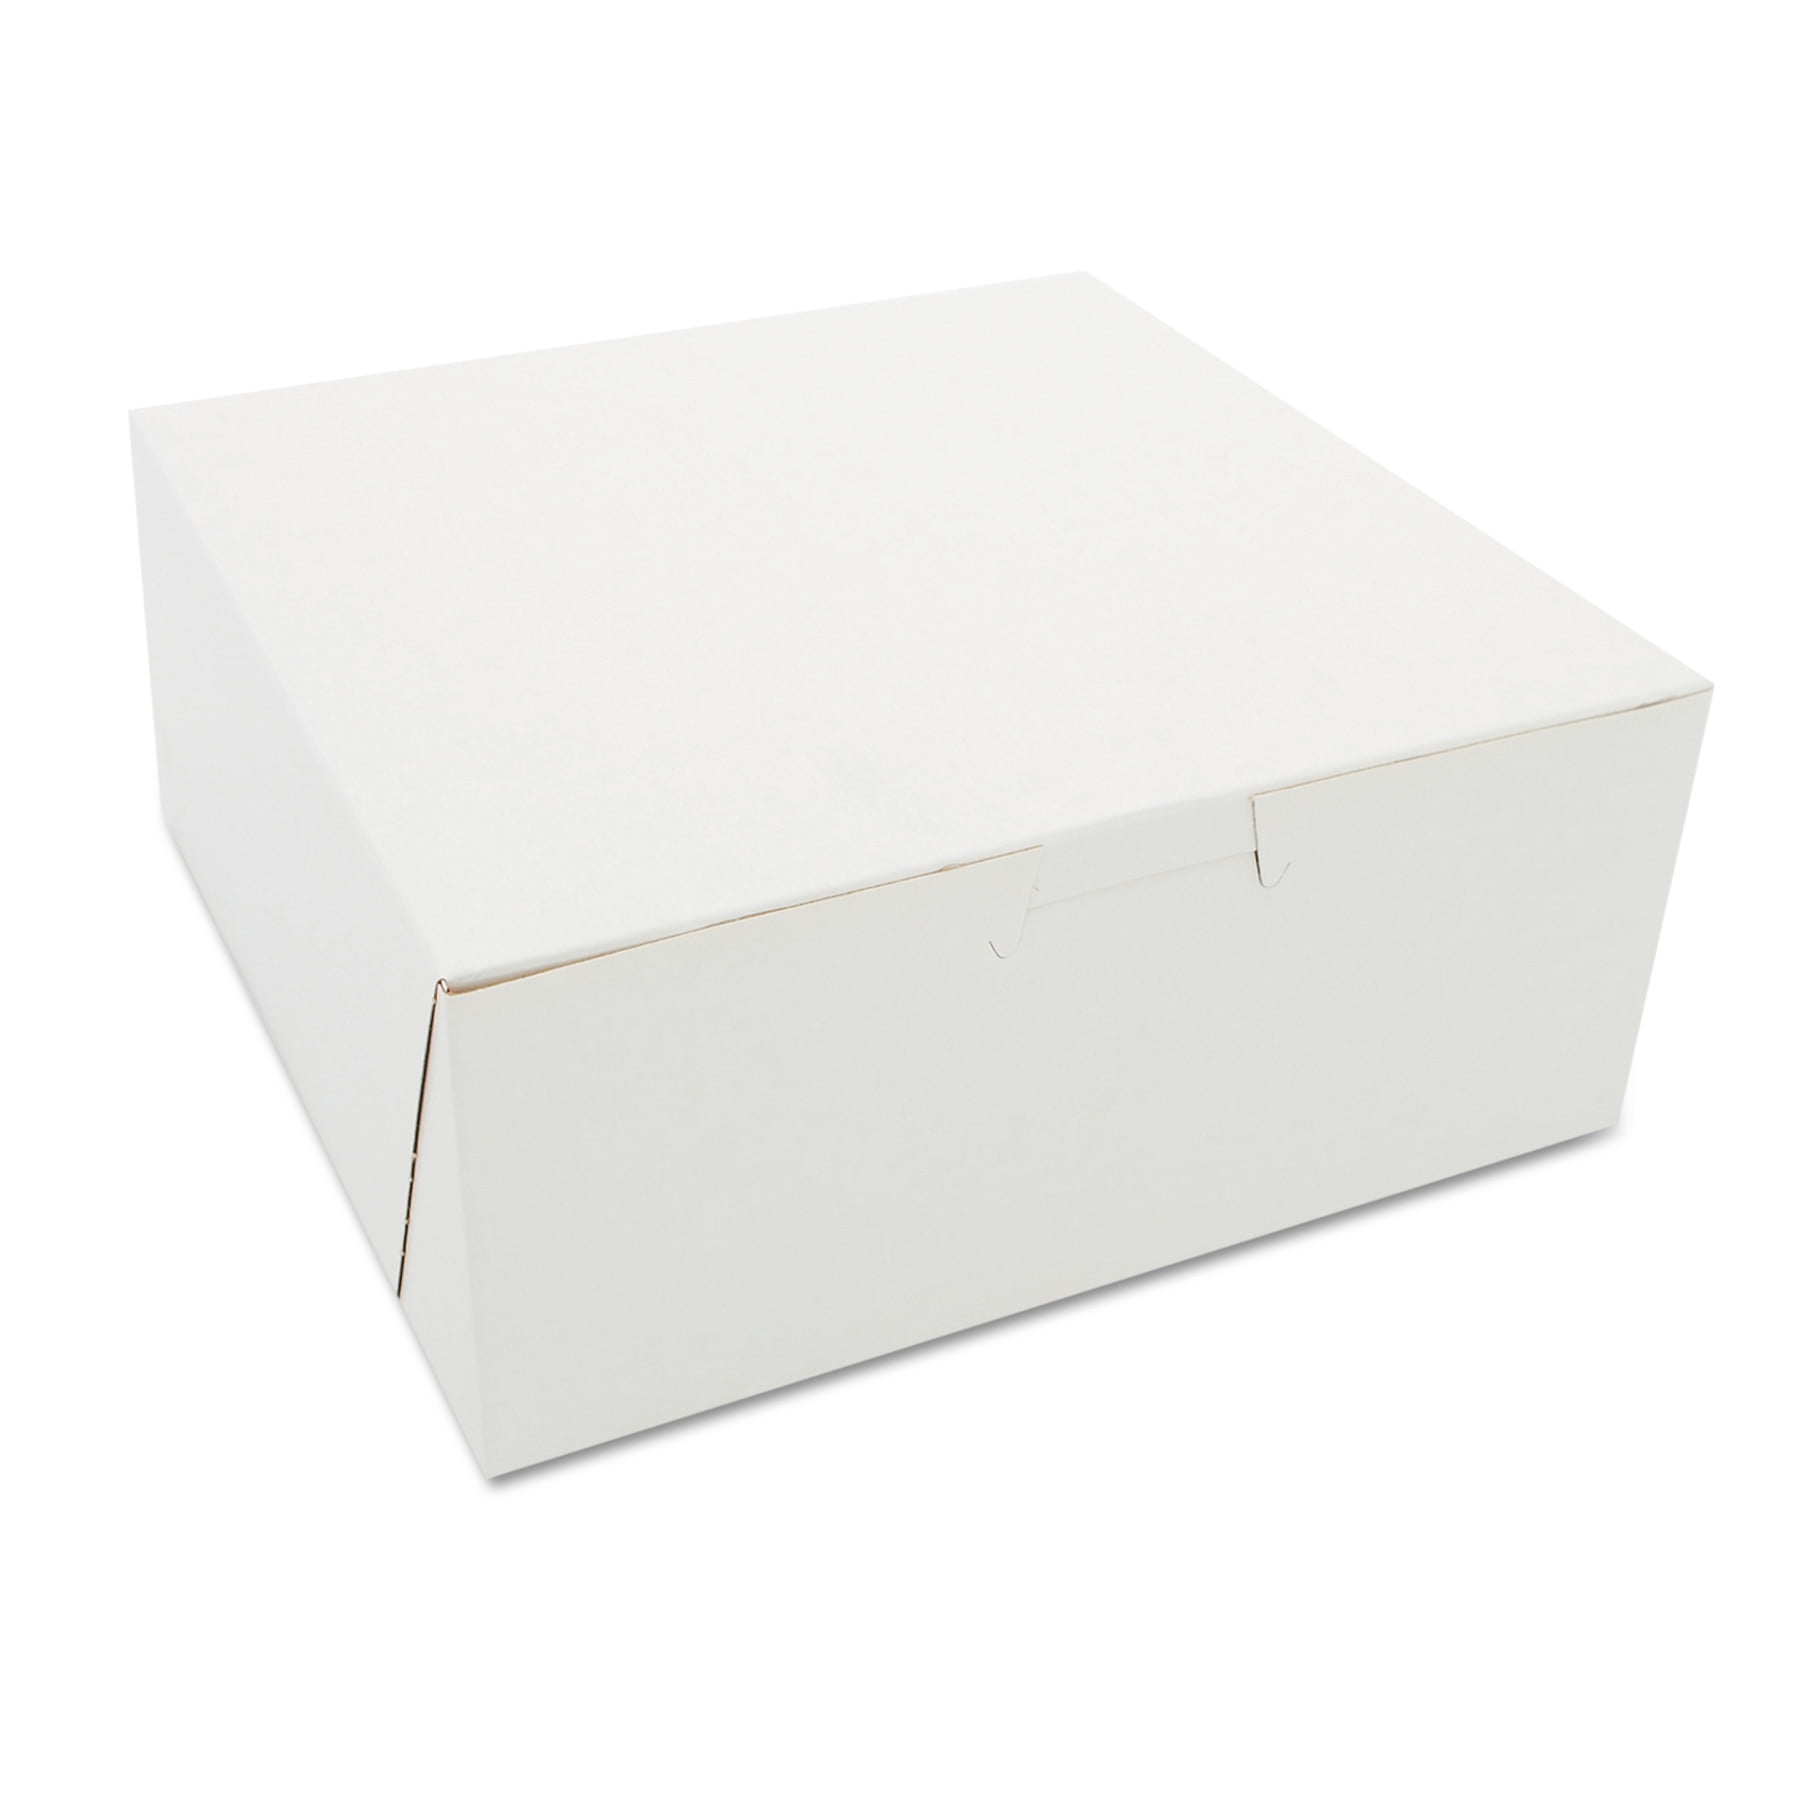 Pack of 15 Boxes 8" x 5 3/4" x 2 1/2" White Bakery Box by MT Products 